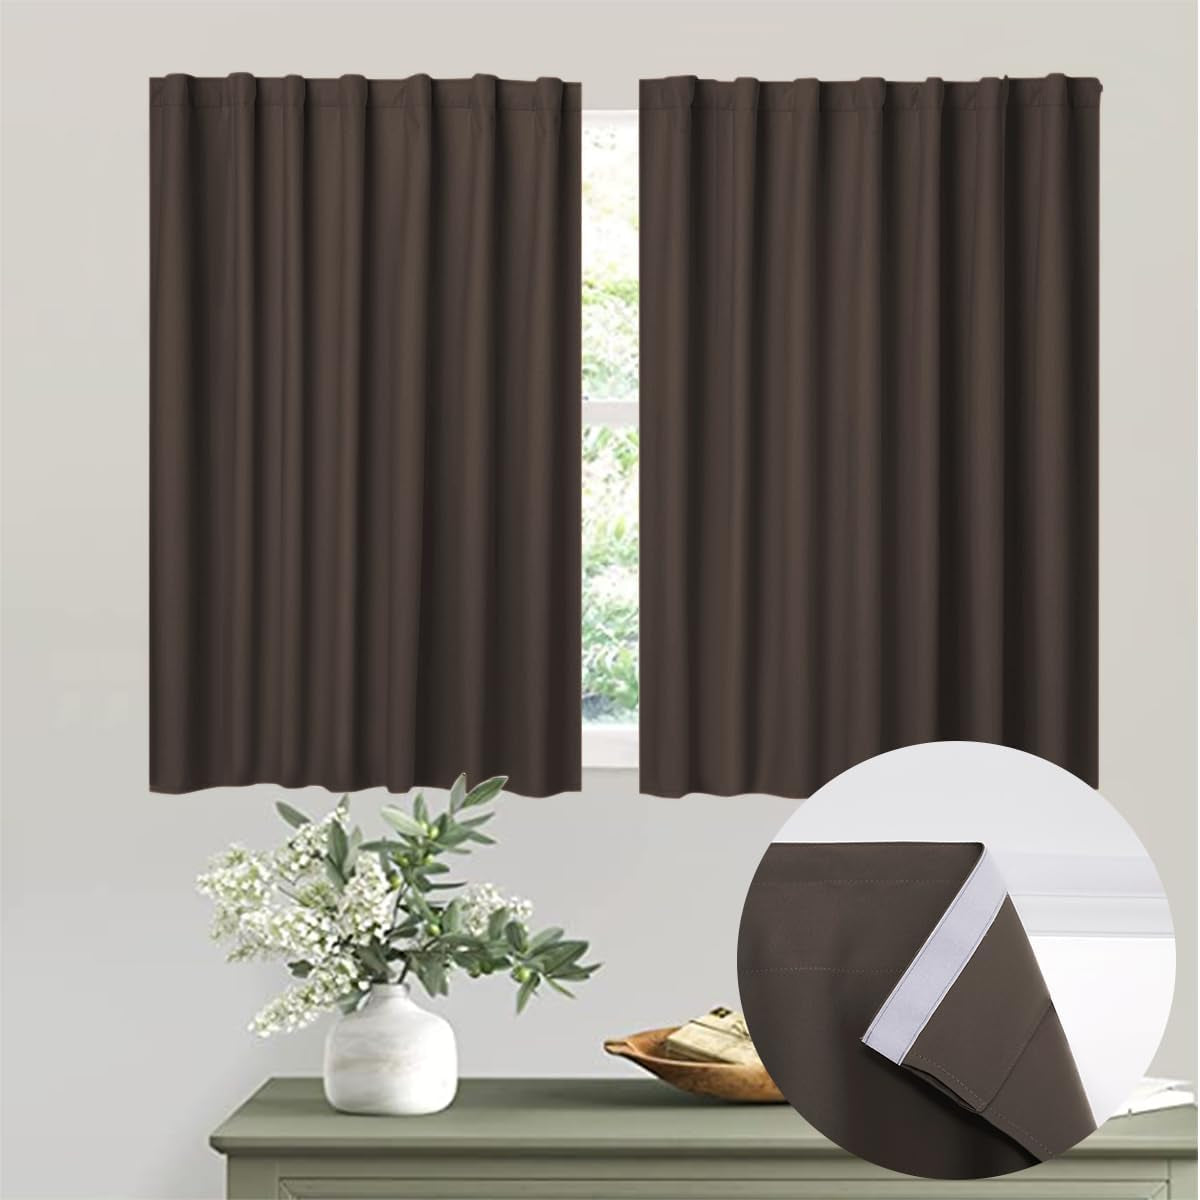 Muamar 2Pcs Blackout Curtains Privacy Curtains 63 Inch Length Window Curtains,Easy Install Thermal Insulated Window Shades,Stick Curtains No Rods, Black 42" W X 63" L  Muamar Coffee 29"W X 36"L 